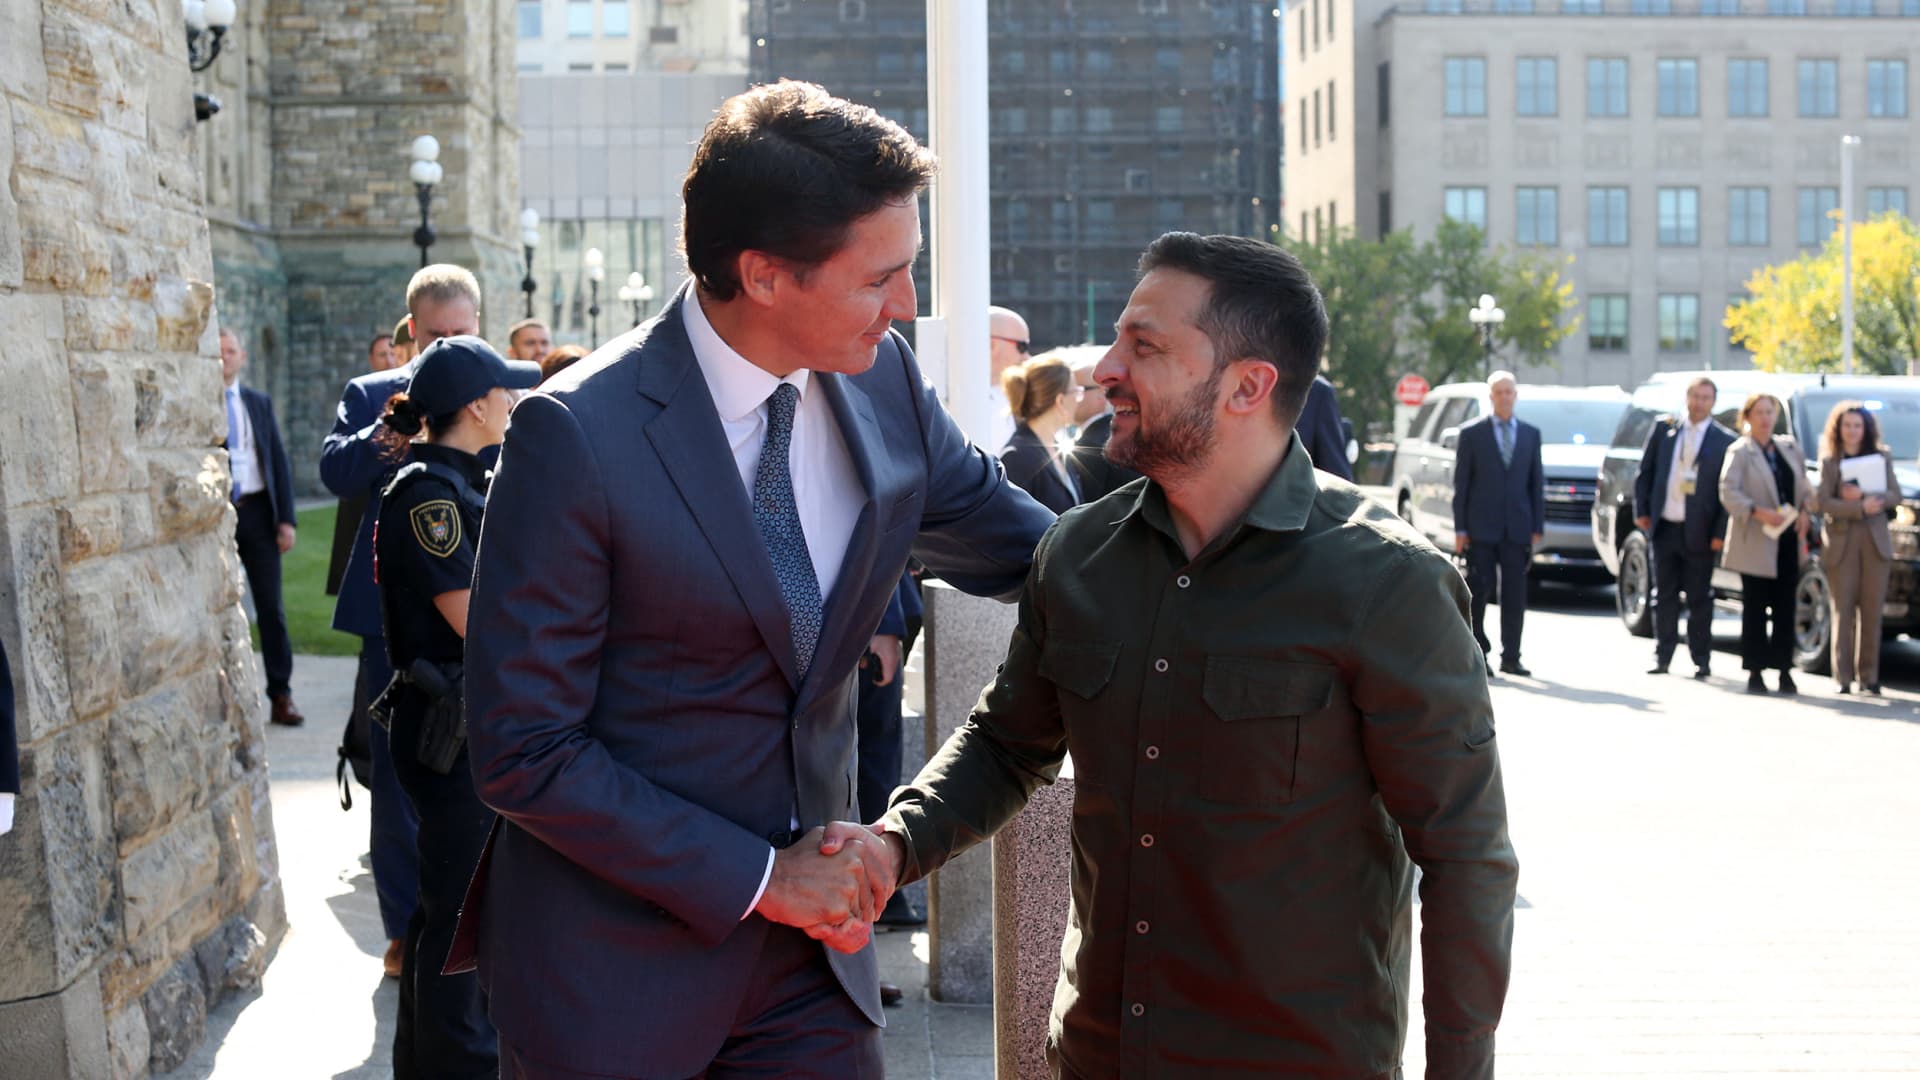 Ukrainian President Volodymyr Zelensky greets Canadian Prime Minister Justin Trudeau on arrival at Parliament Hill in Ottawa, Canada, on September 22, 2023.